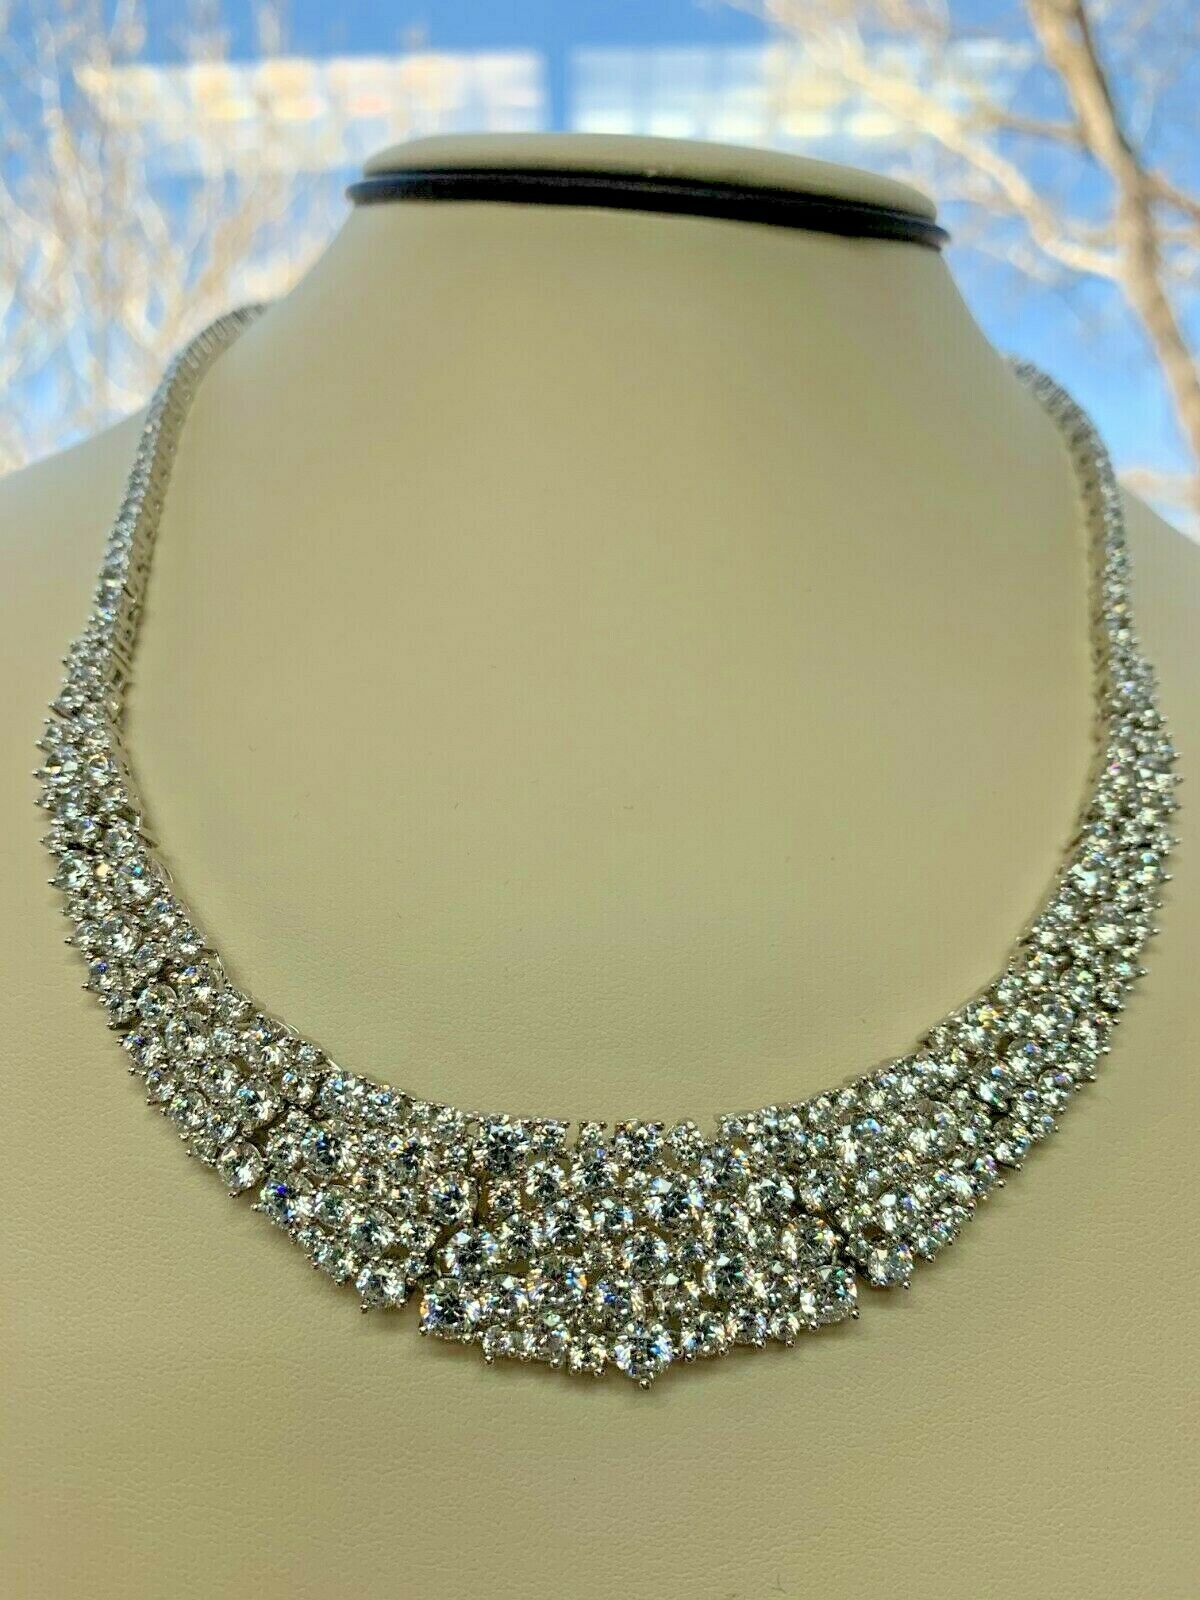 Absolute 18" Sterling Silver Cubic Zirconia Tapered Bib Necklace - HSNIntroducing the Absolute 18" Sterling Silver Cubic Zirconia Tapered Bib Necklace from HSN, a masterpiece of elegance and glamour that's bound to captivate.
Key FeatuJewelry & Watches:Fine Jewelry:Fine Necklaces & Pendants:GemstoneAbsolute 18" Sterling Silver Cubic Zirconia Tapered Bib Necklace - HSN $600Duhaas